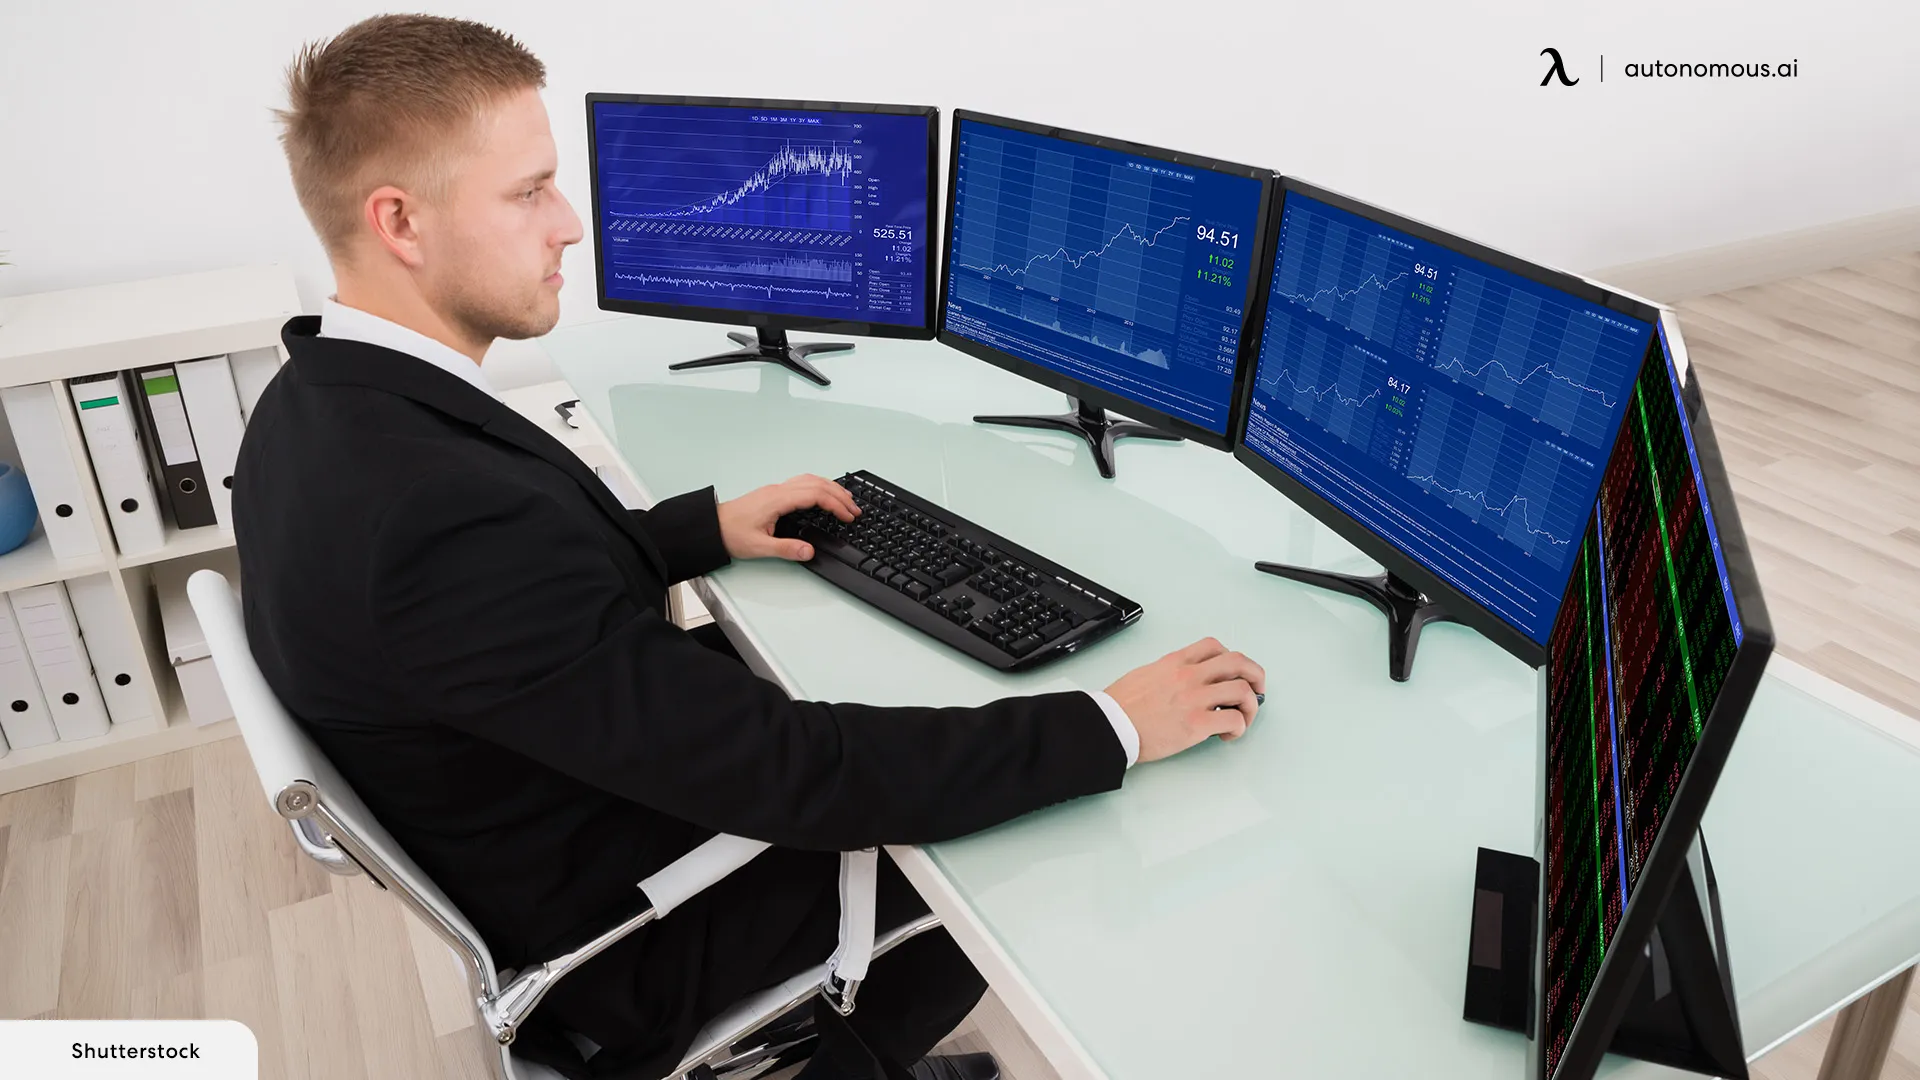 How to Build a 4-Monitor Setup for Trading?